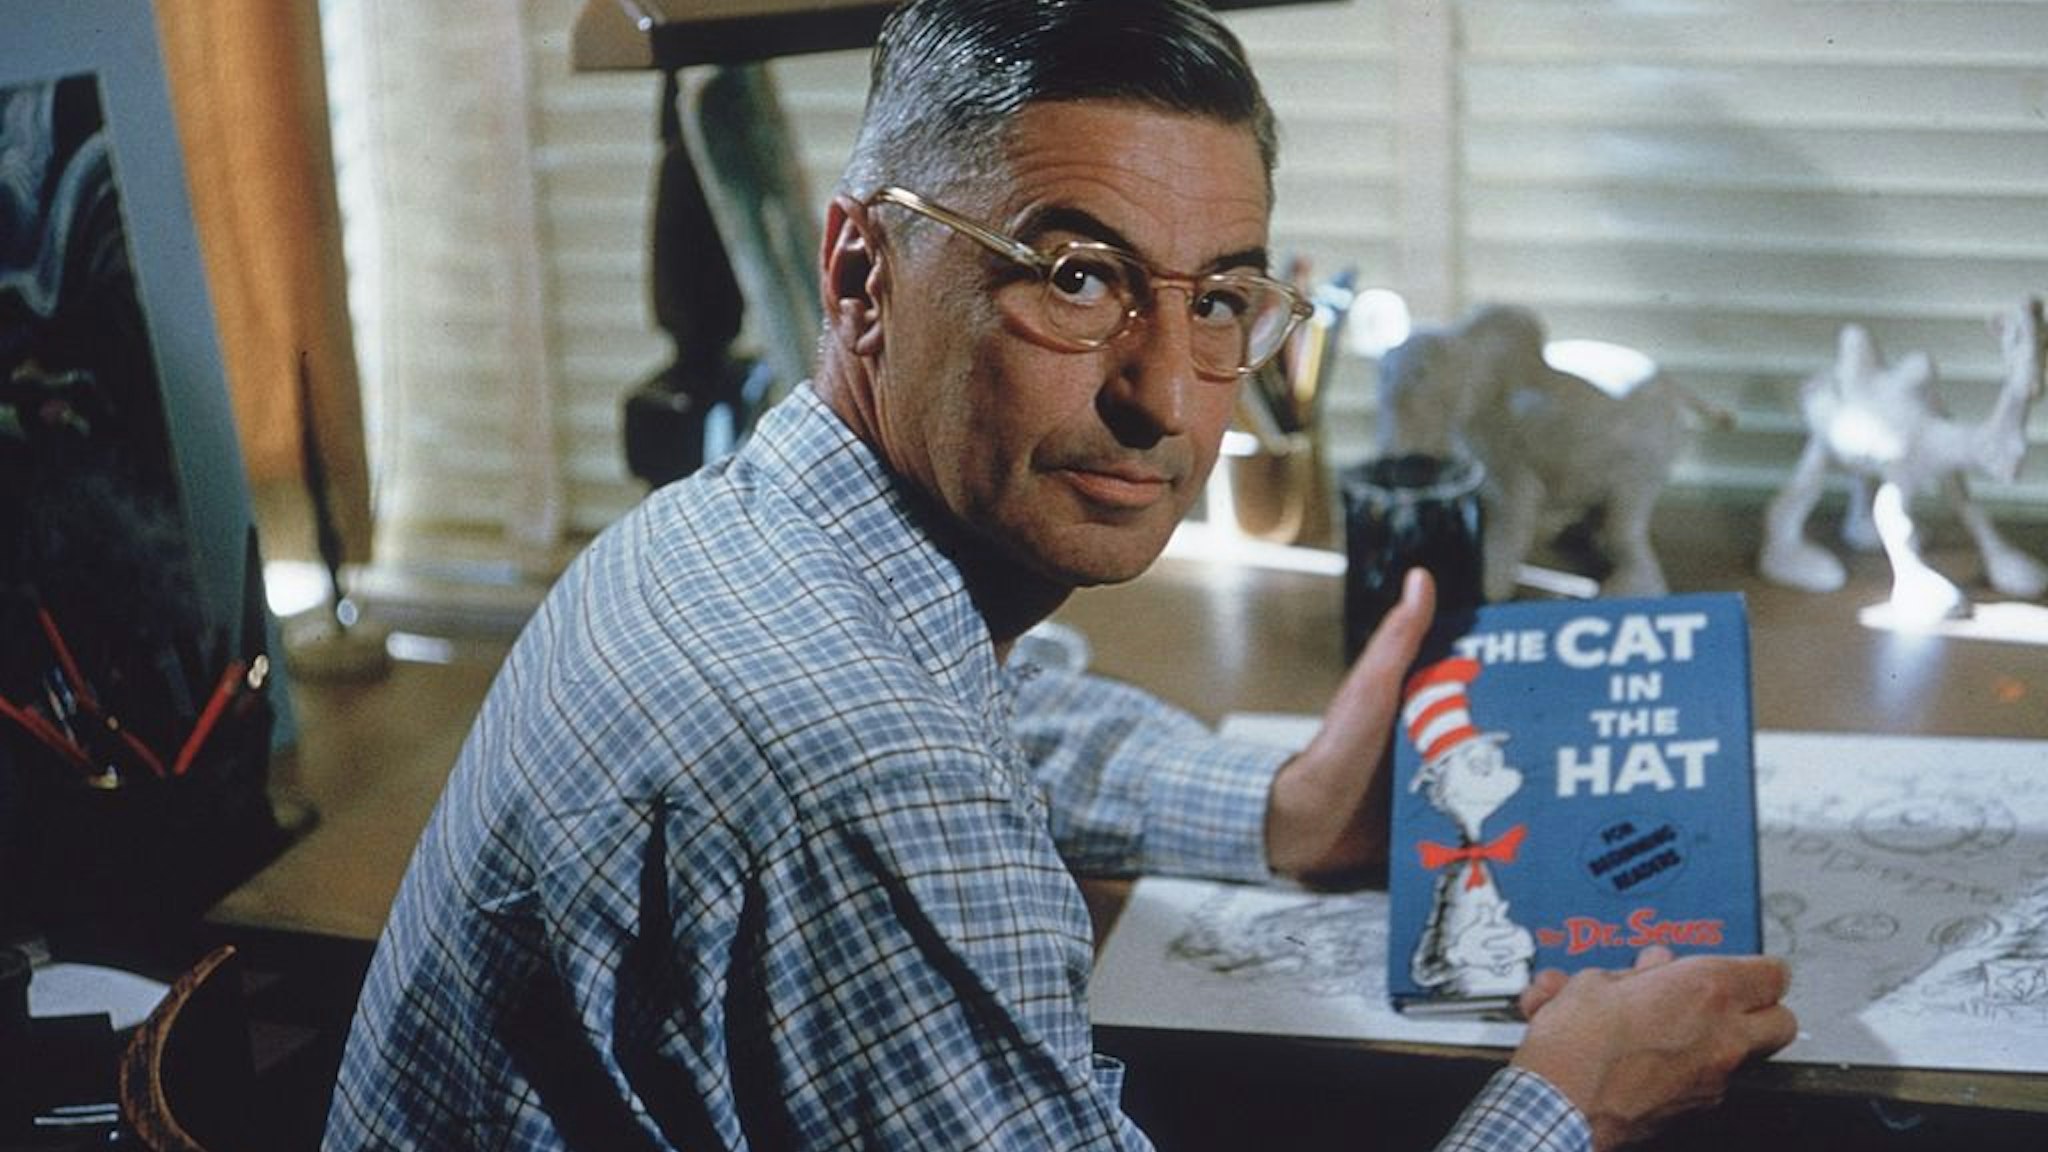 American author and illustrator Dr Seuss (Theodor Seuss Geisel, 1904 - 1991) sits at his drafting table in his home office with a copy of his book, 'The Cat in the Hat', La Jolla, California, April 25, 1957.